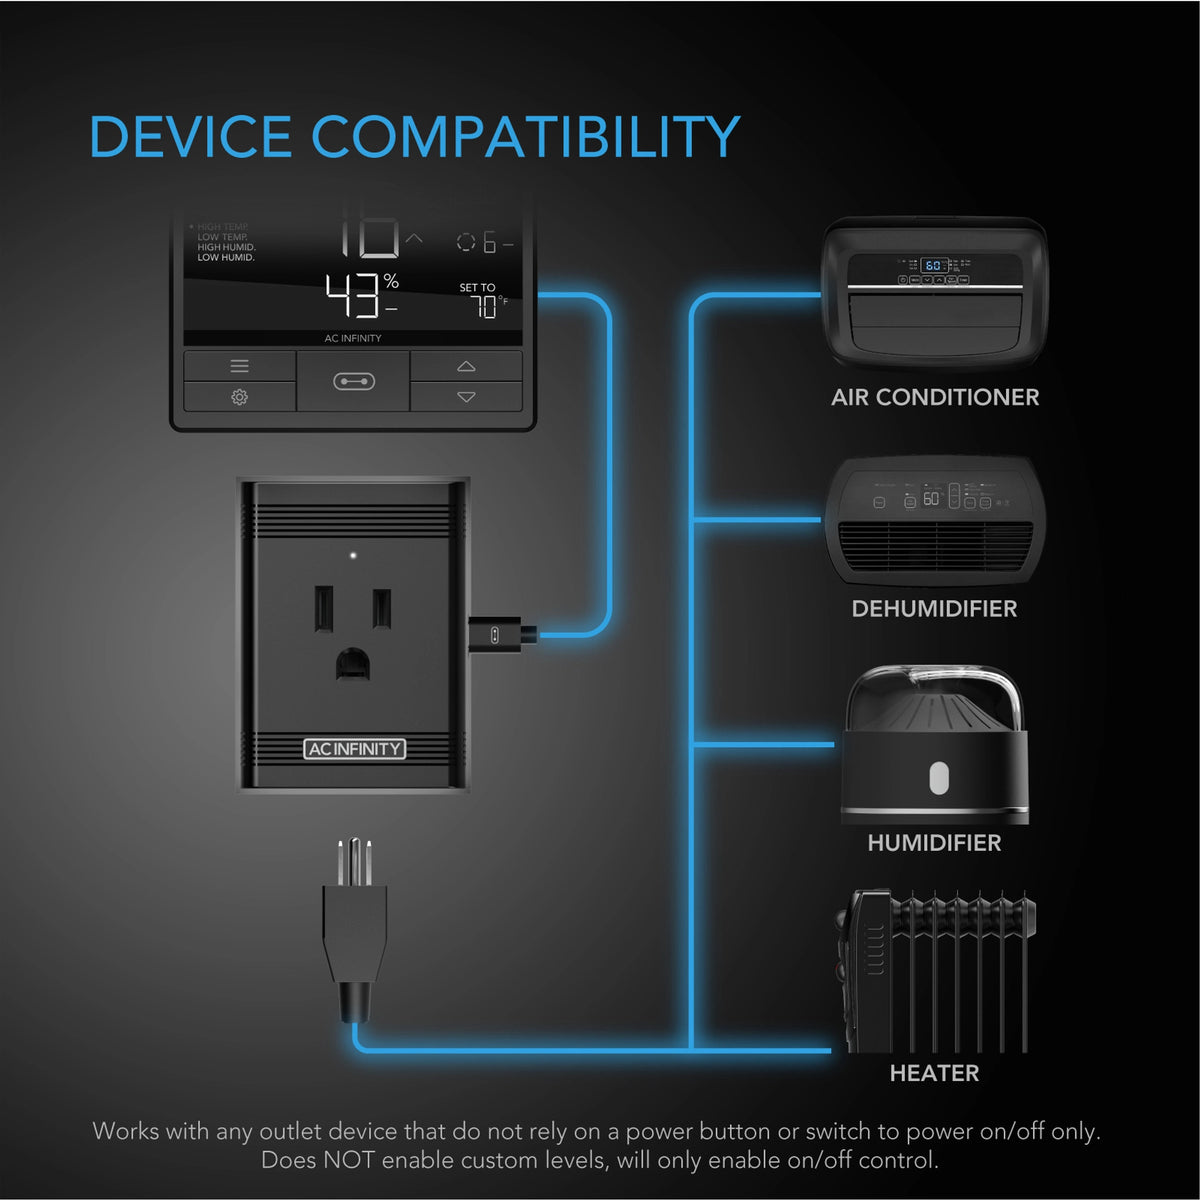 UIS Device compatibility